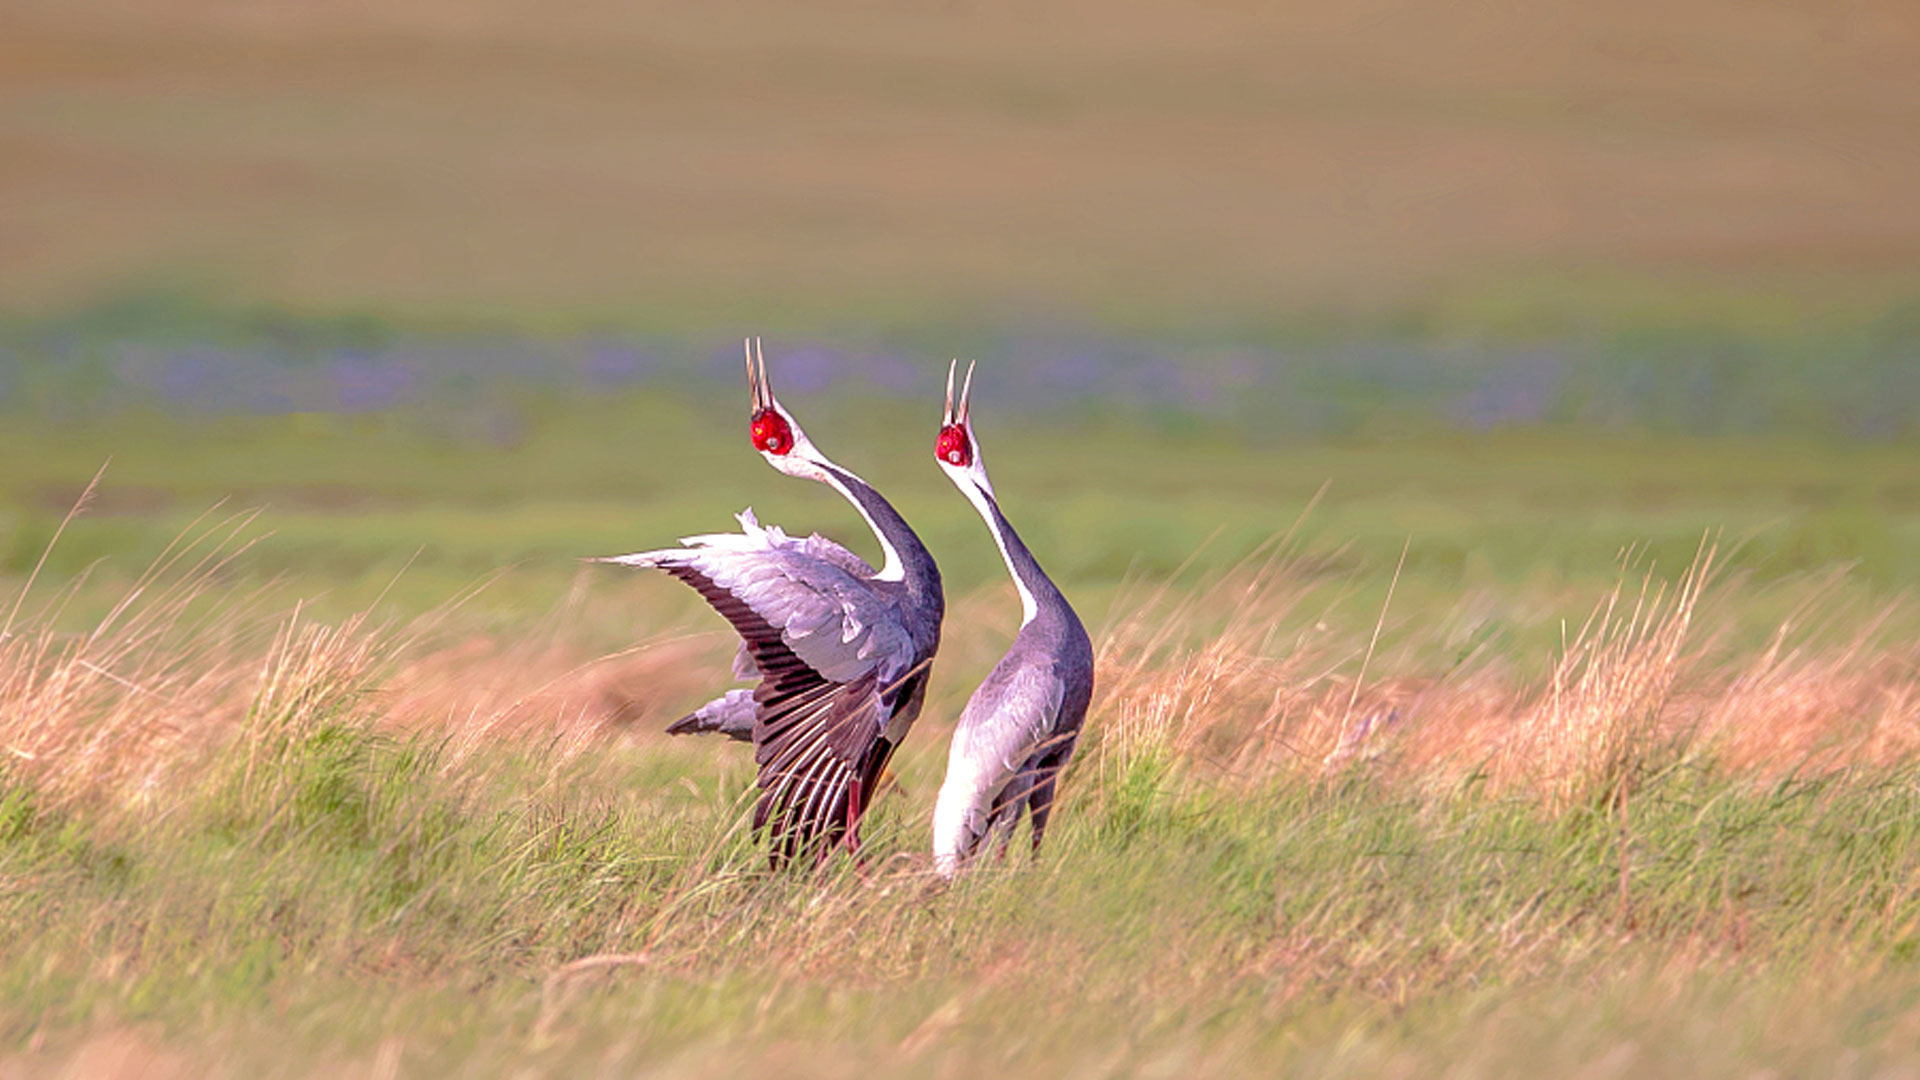 White-naped cranes spotted at E China's Dongying